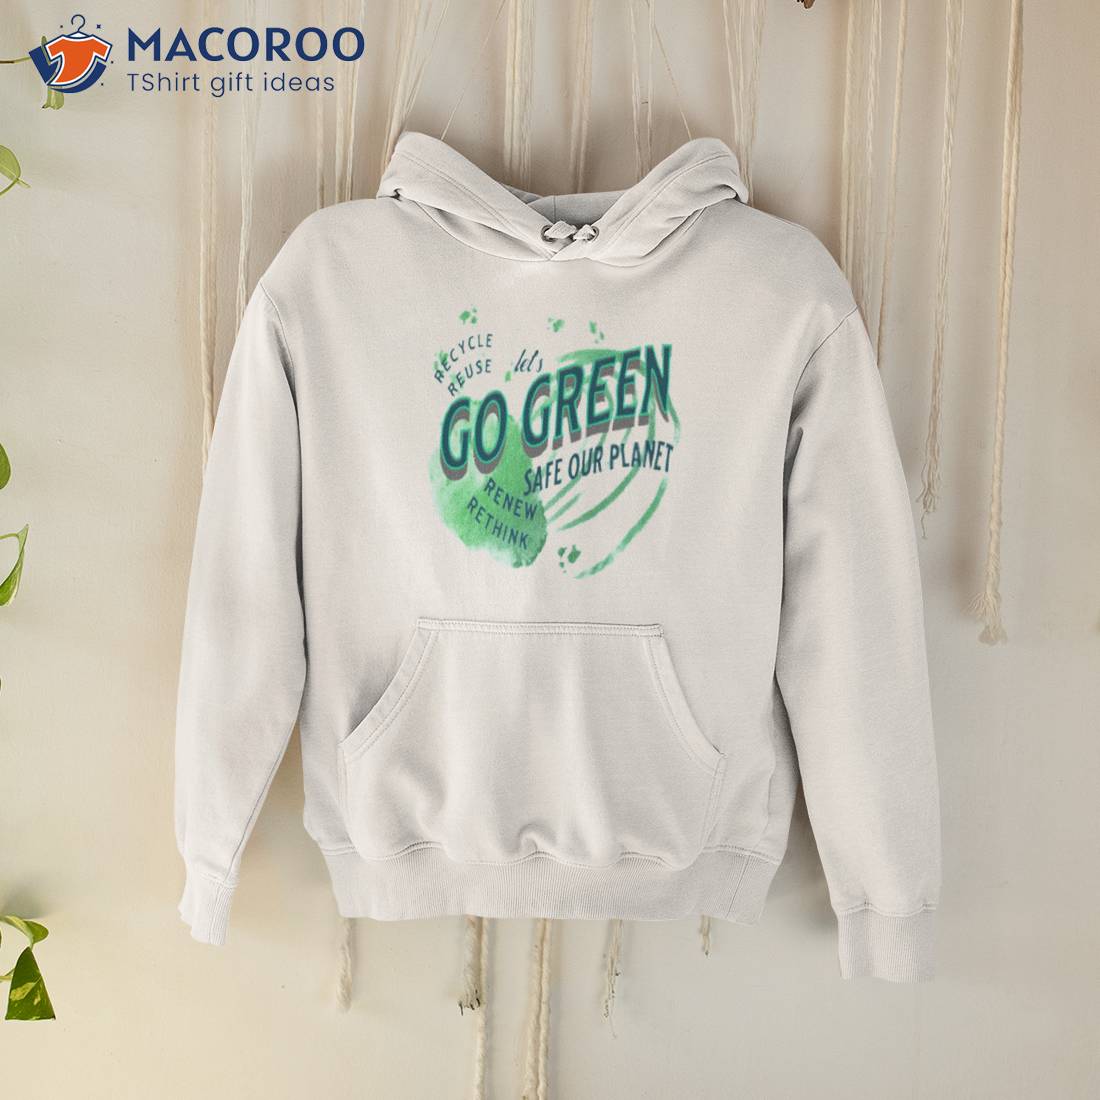 Lets Go Green Safe Our Planet 2 Recycle Reuse Renew Shirt